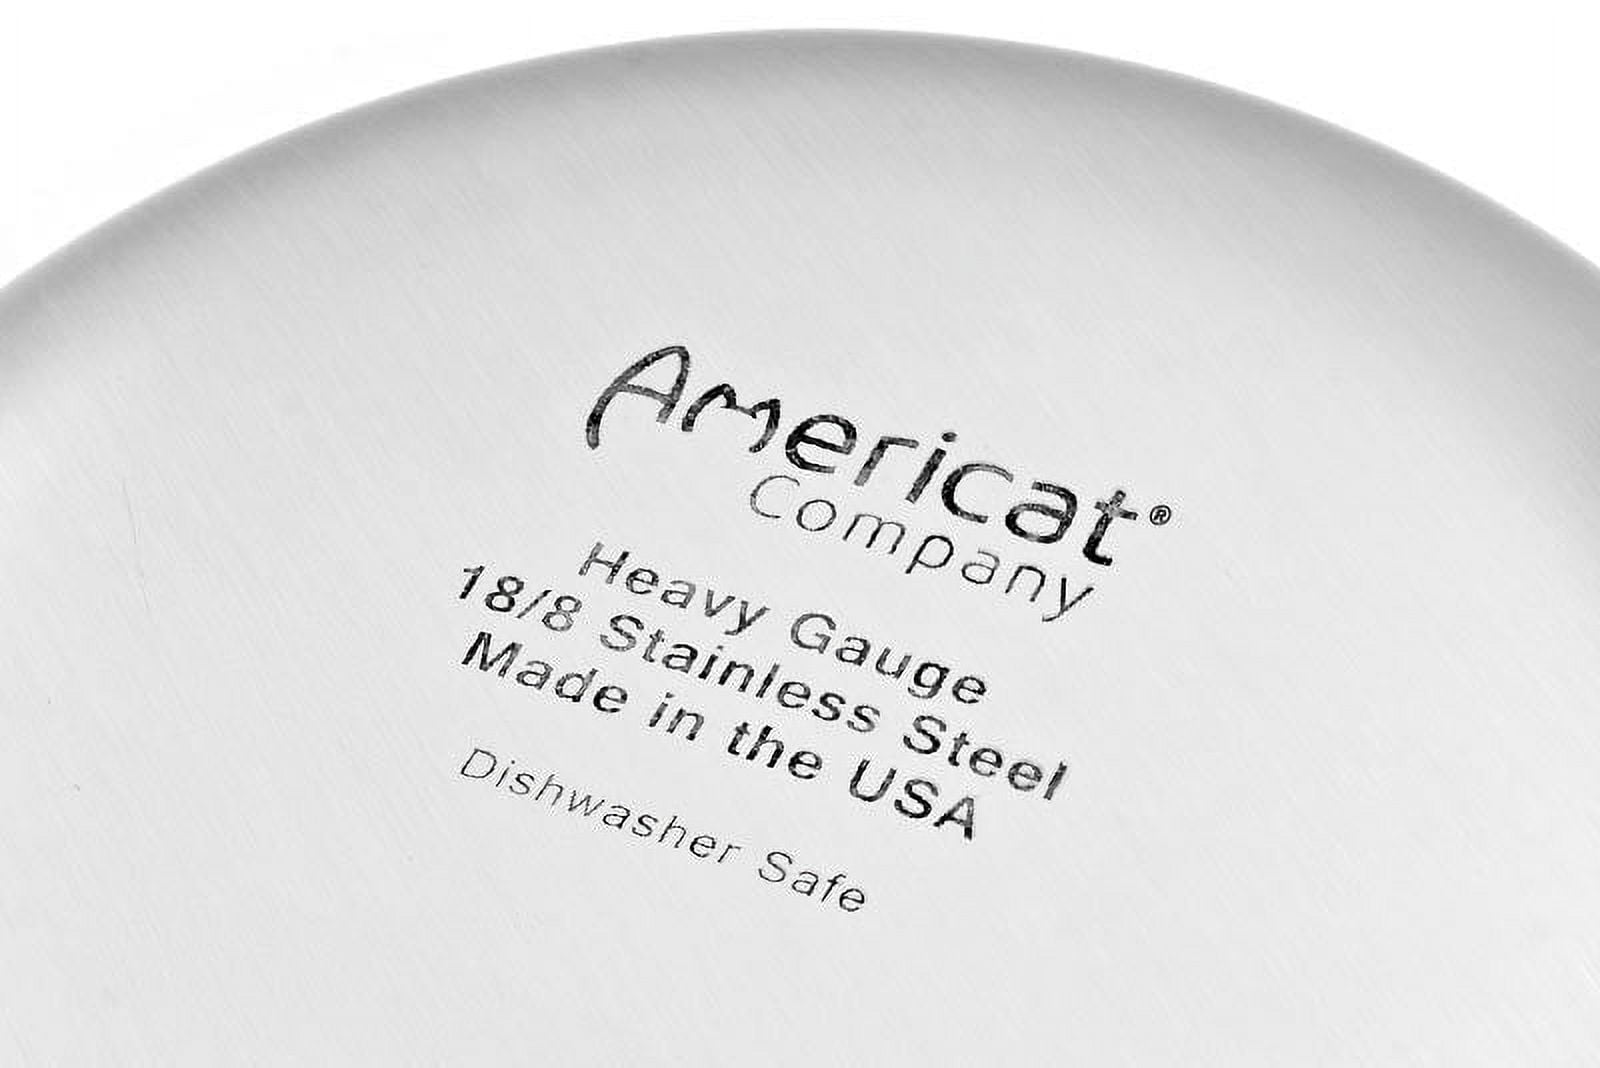 Americat Company: Elevated Stand with Cat Bowl